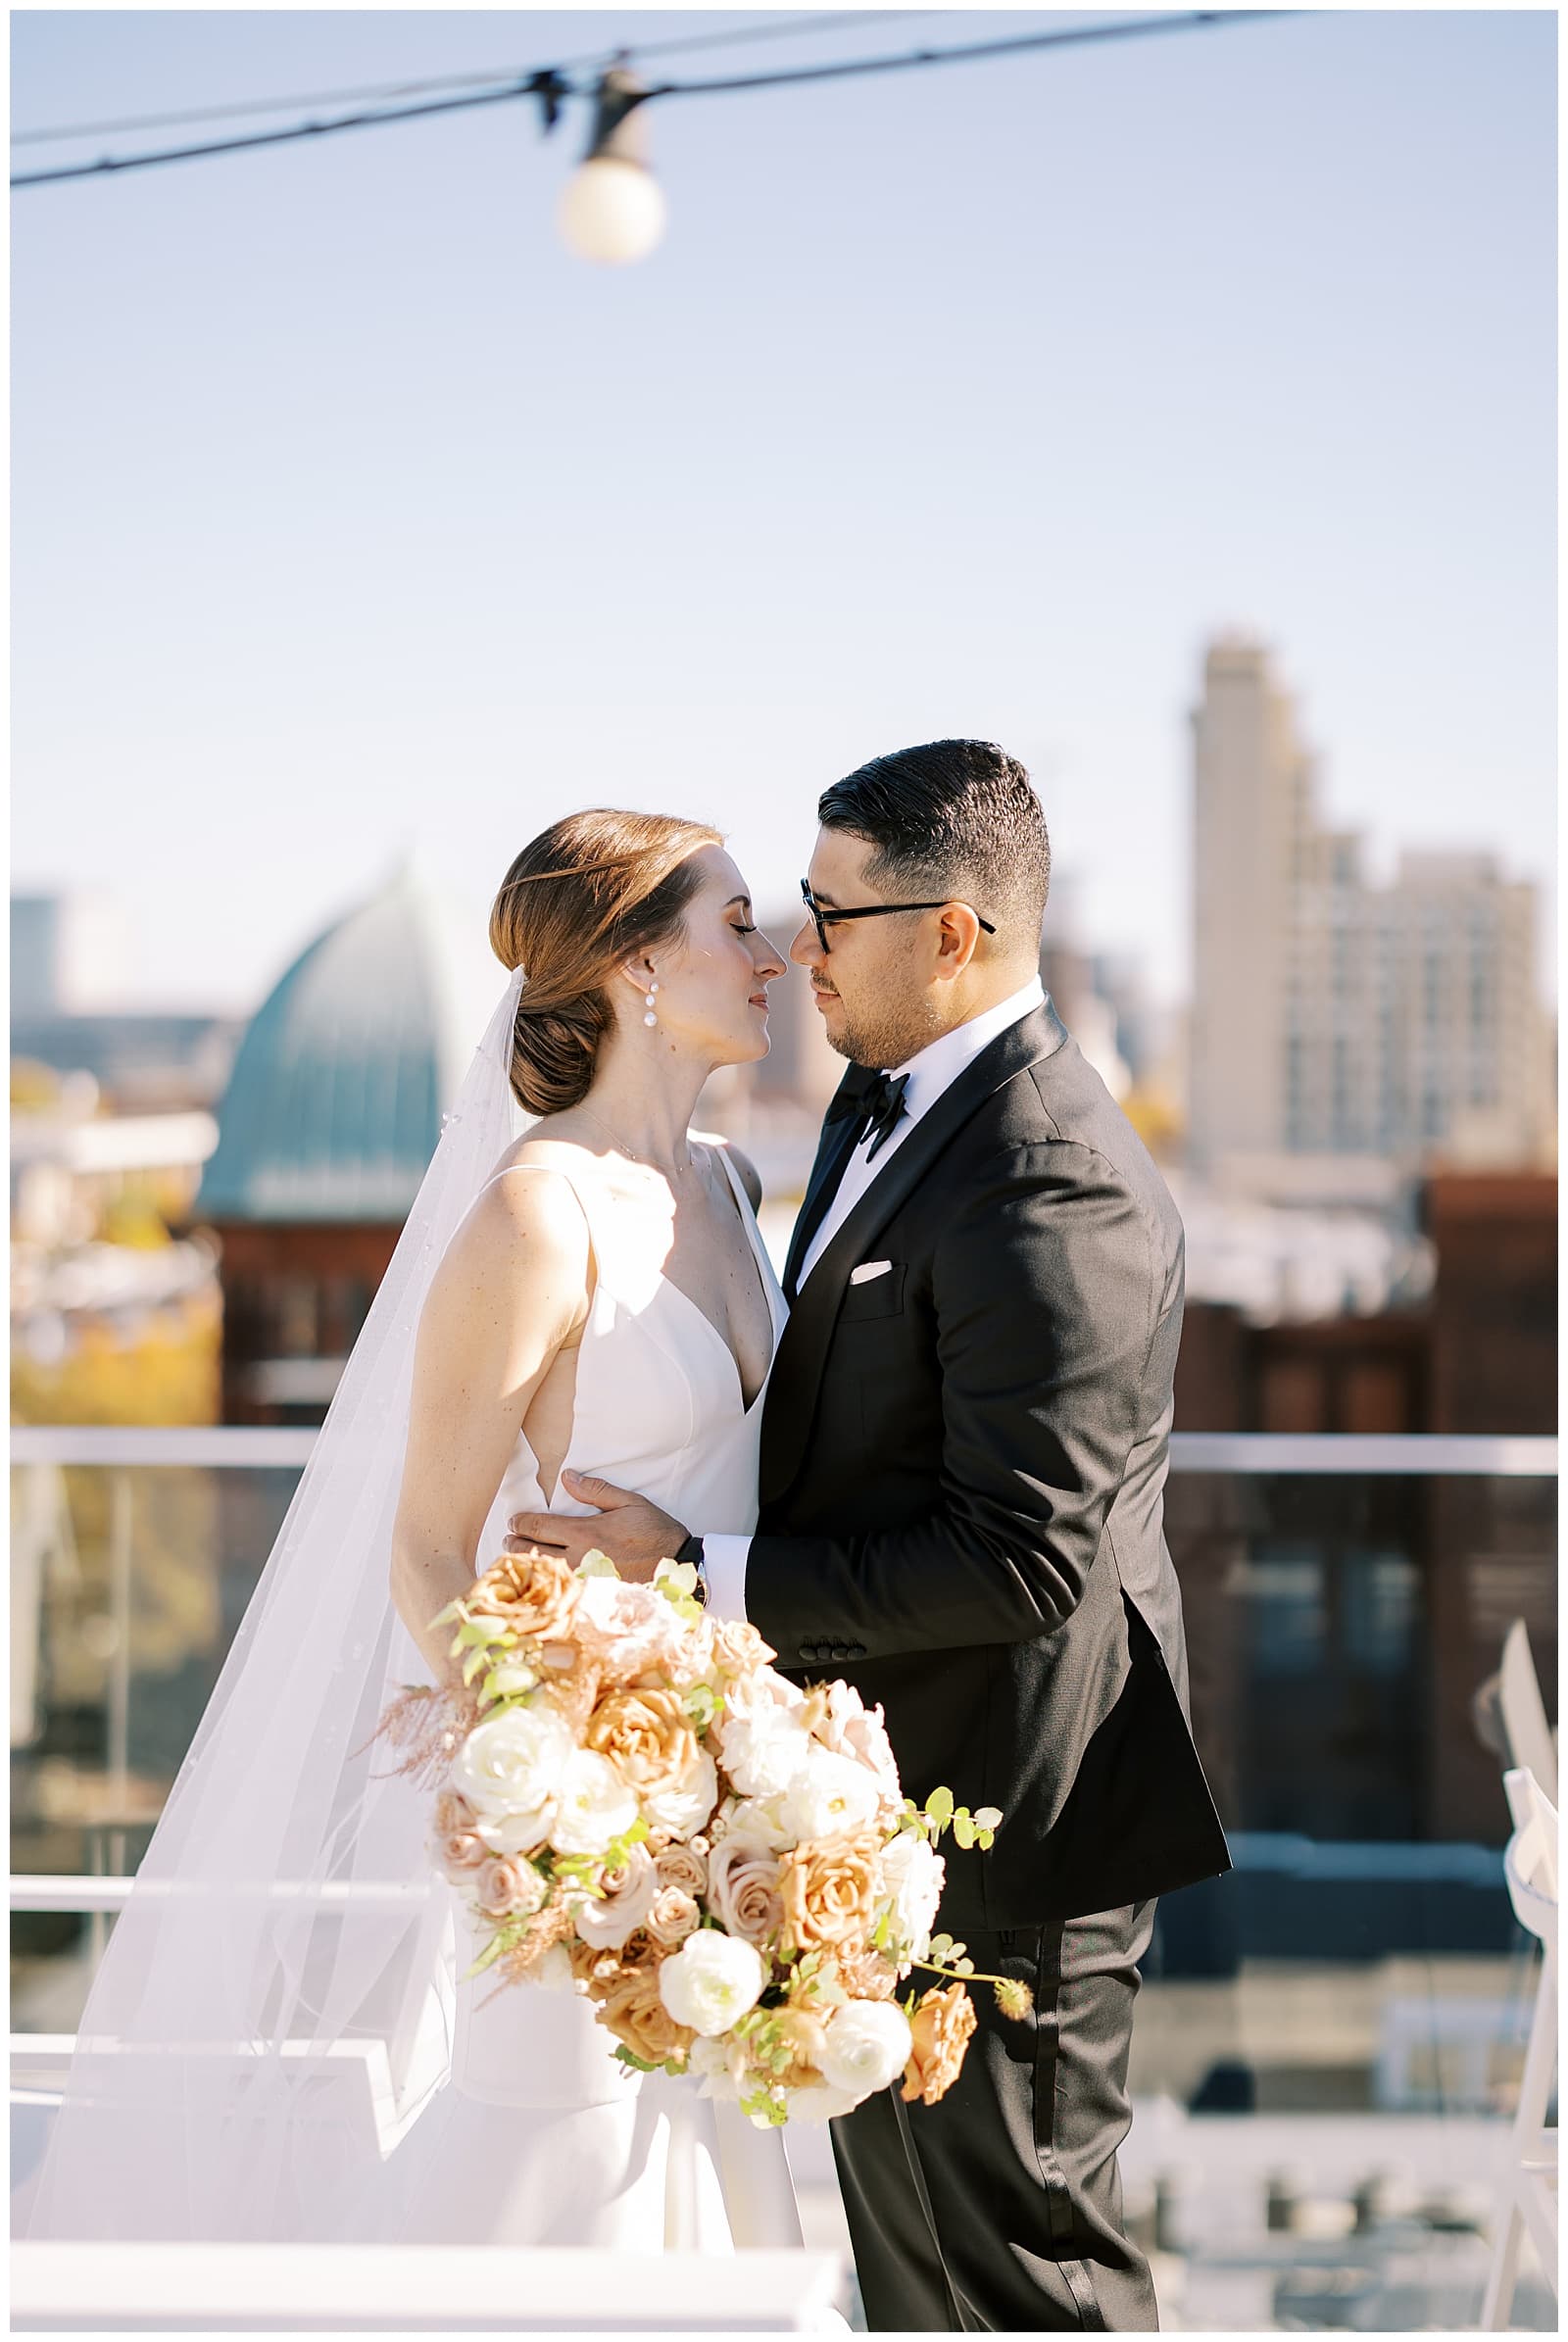 A red headed woman in a white modern wedding dress with a veil leans in to kiss a handsome groom in a black tuxedo with the Richmond skyline behind them on the roof of the Quirk Hotel Richmond